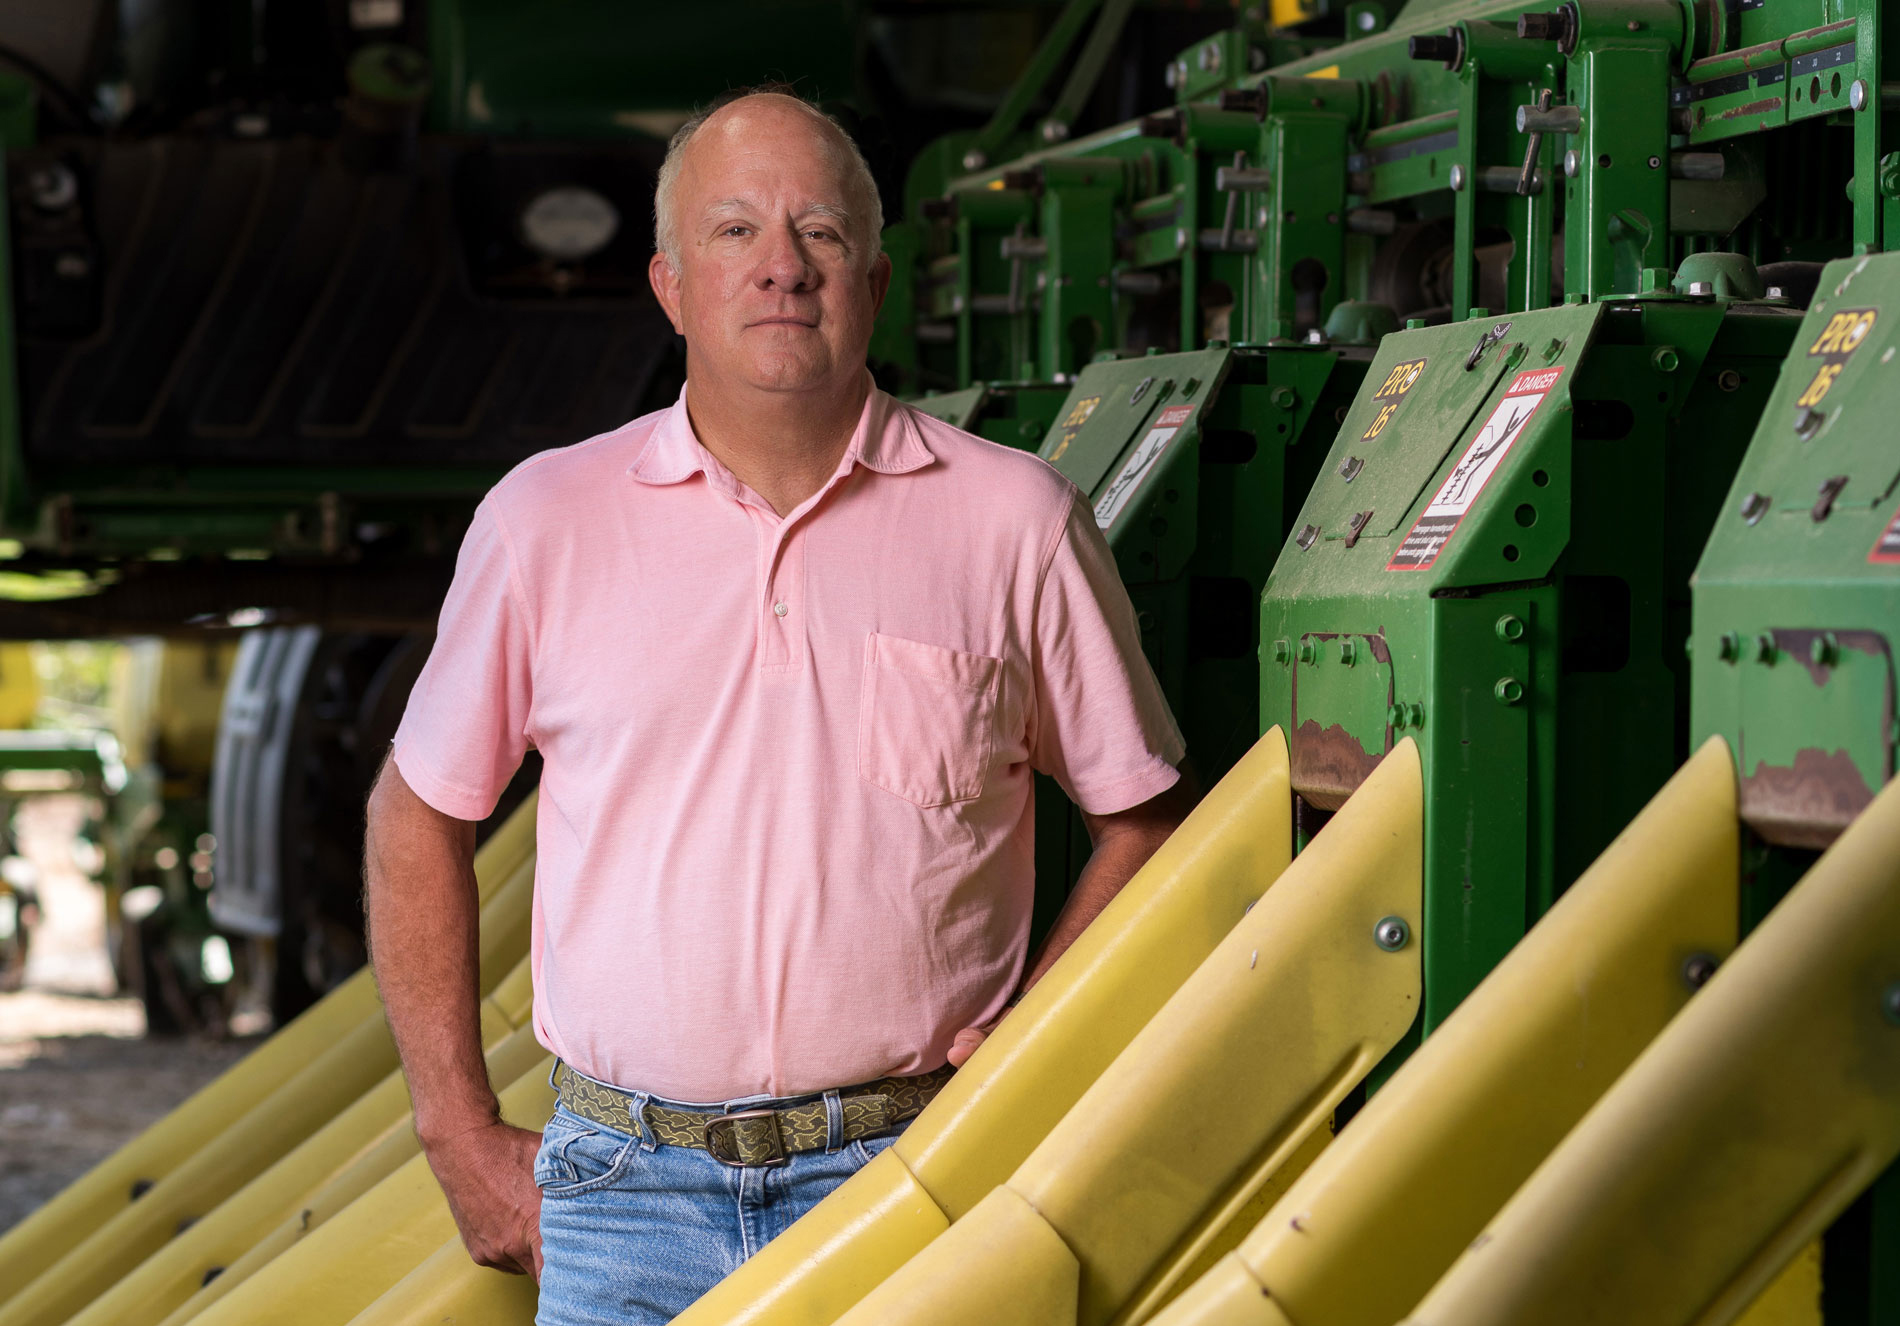 A bald man wearing a pink polo and jeans standing beside farm equipment.